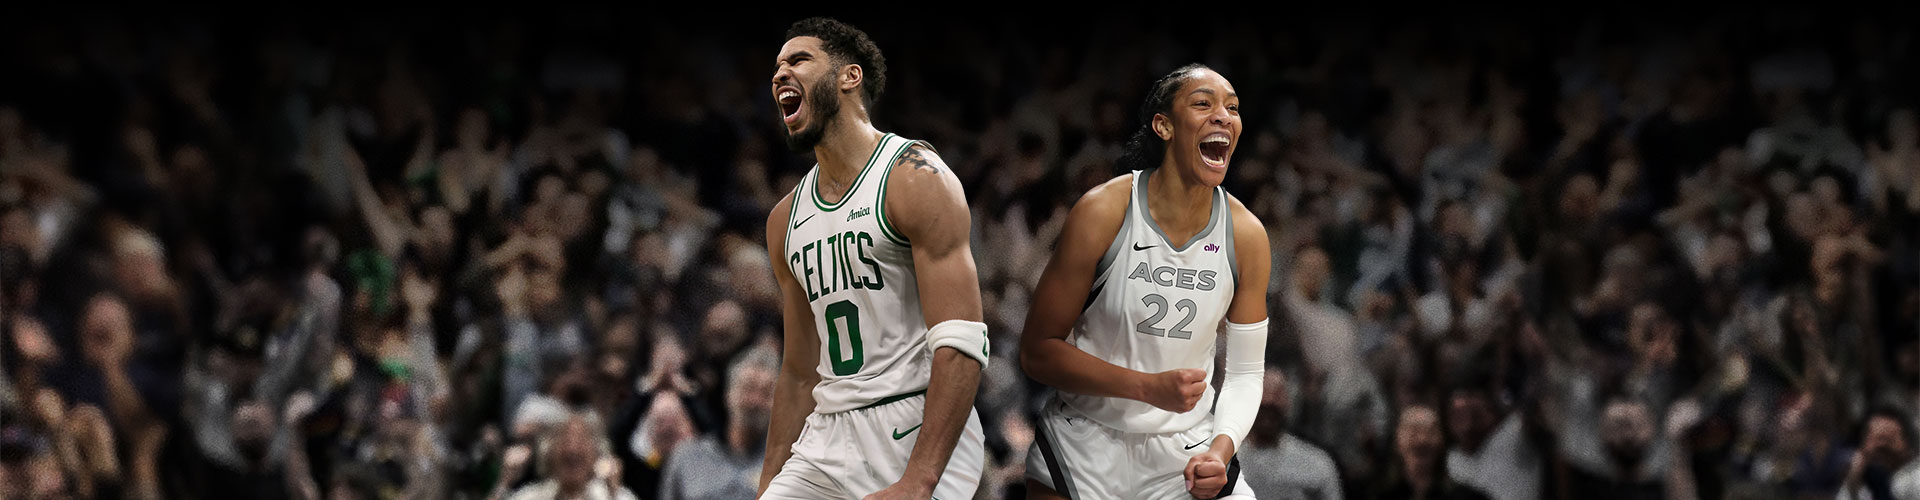 Jayson Tatum in a number 0 Boston Celtics jersey and A’ja Wilson in a number 22 Las Vegas Aces jersey standing together and yelling in happiness in front of a crowd.